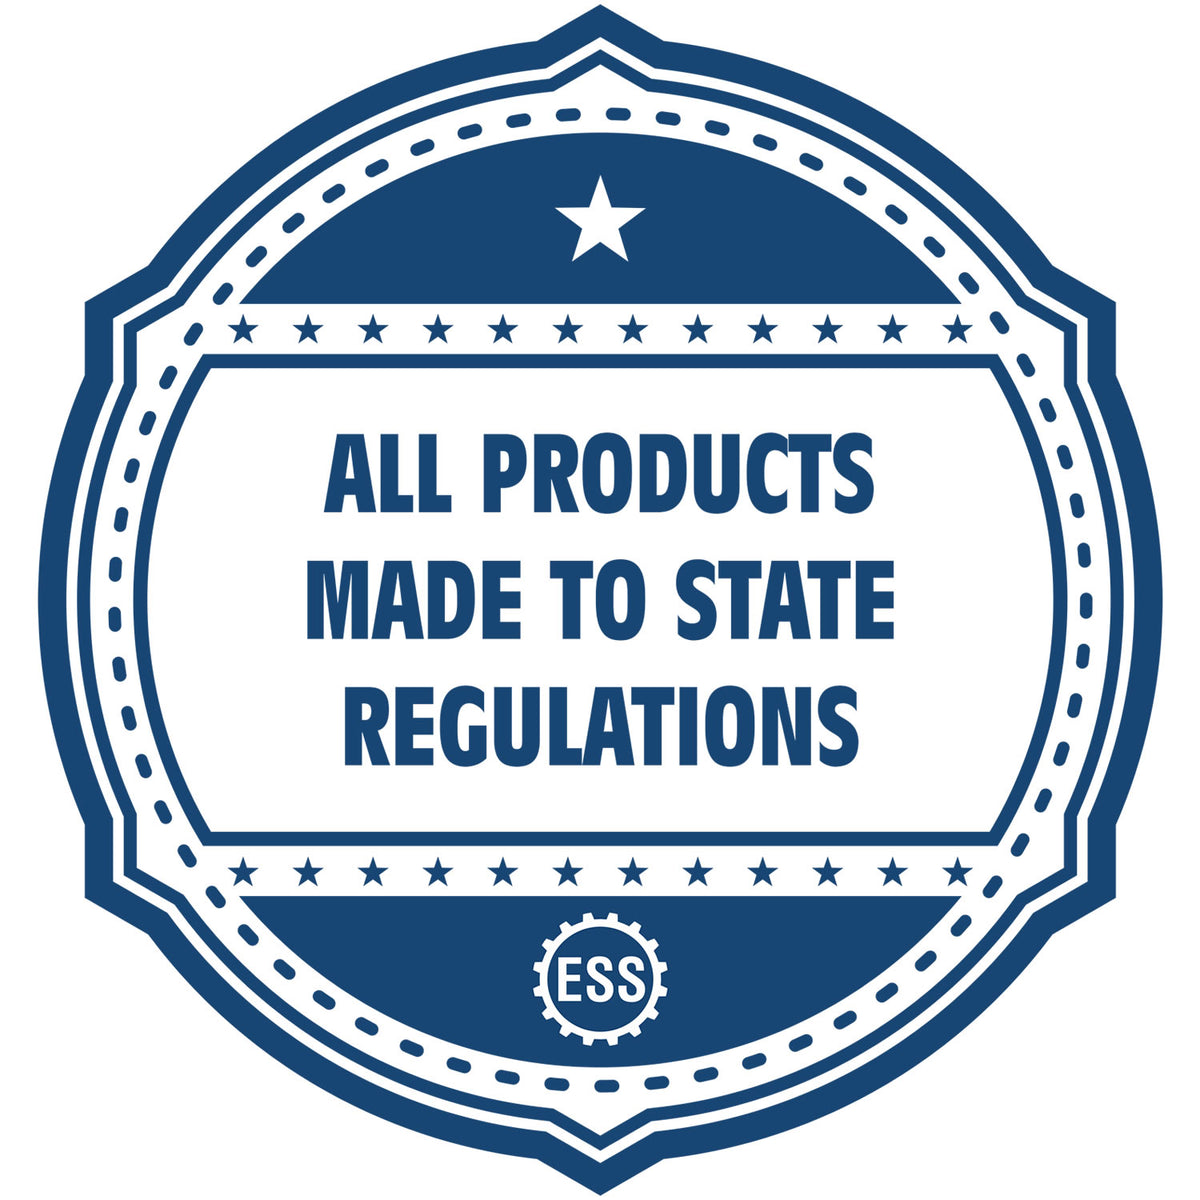 An icon or badge element for the State of Arizona Soft Land Surveyor Embossing Seal showing that this product is made in compliance with state regulations.